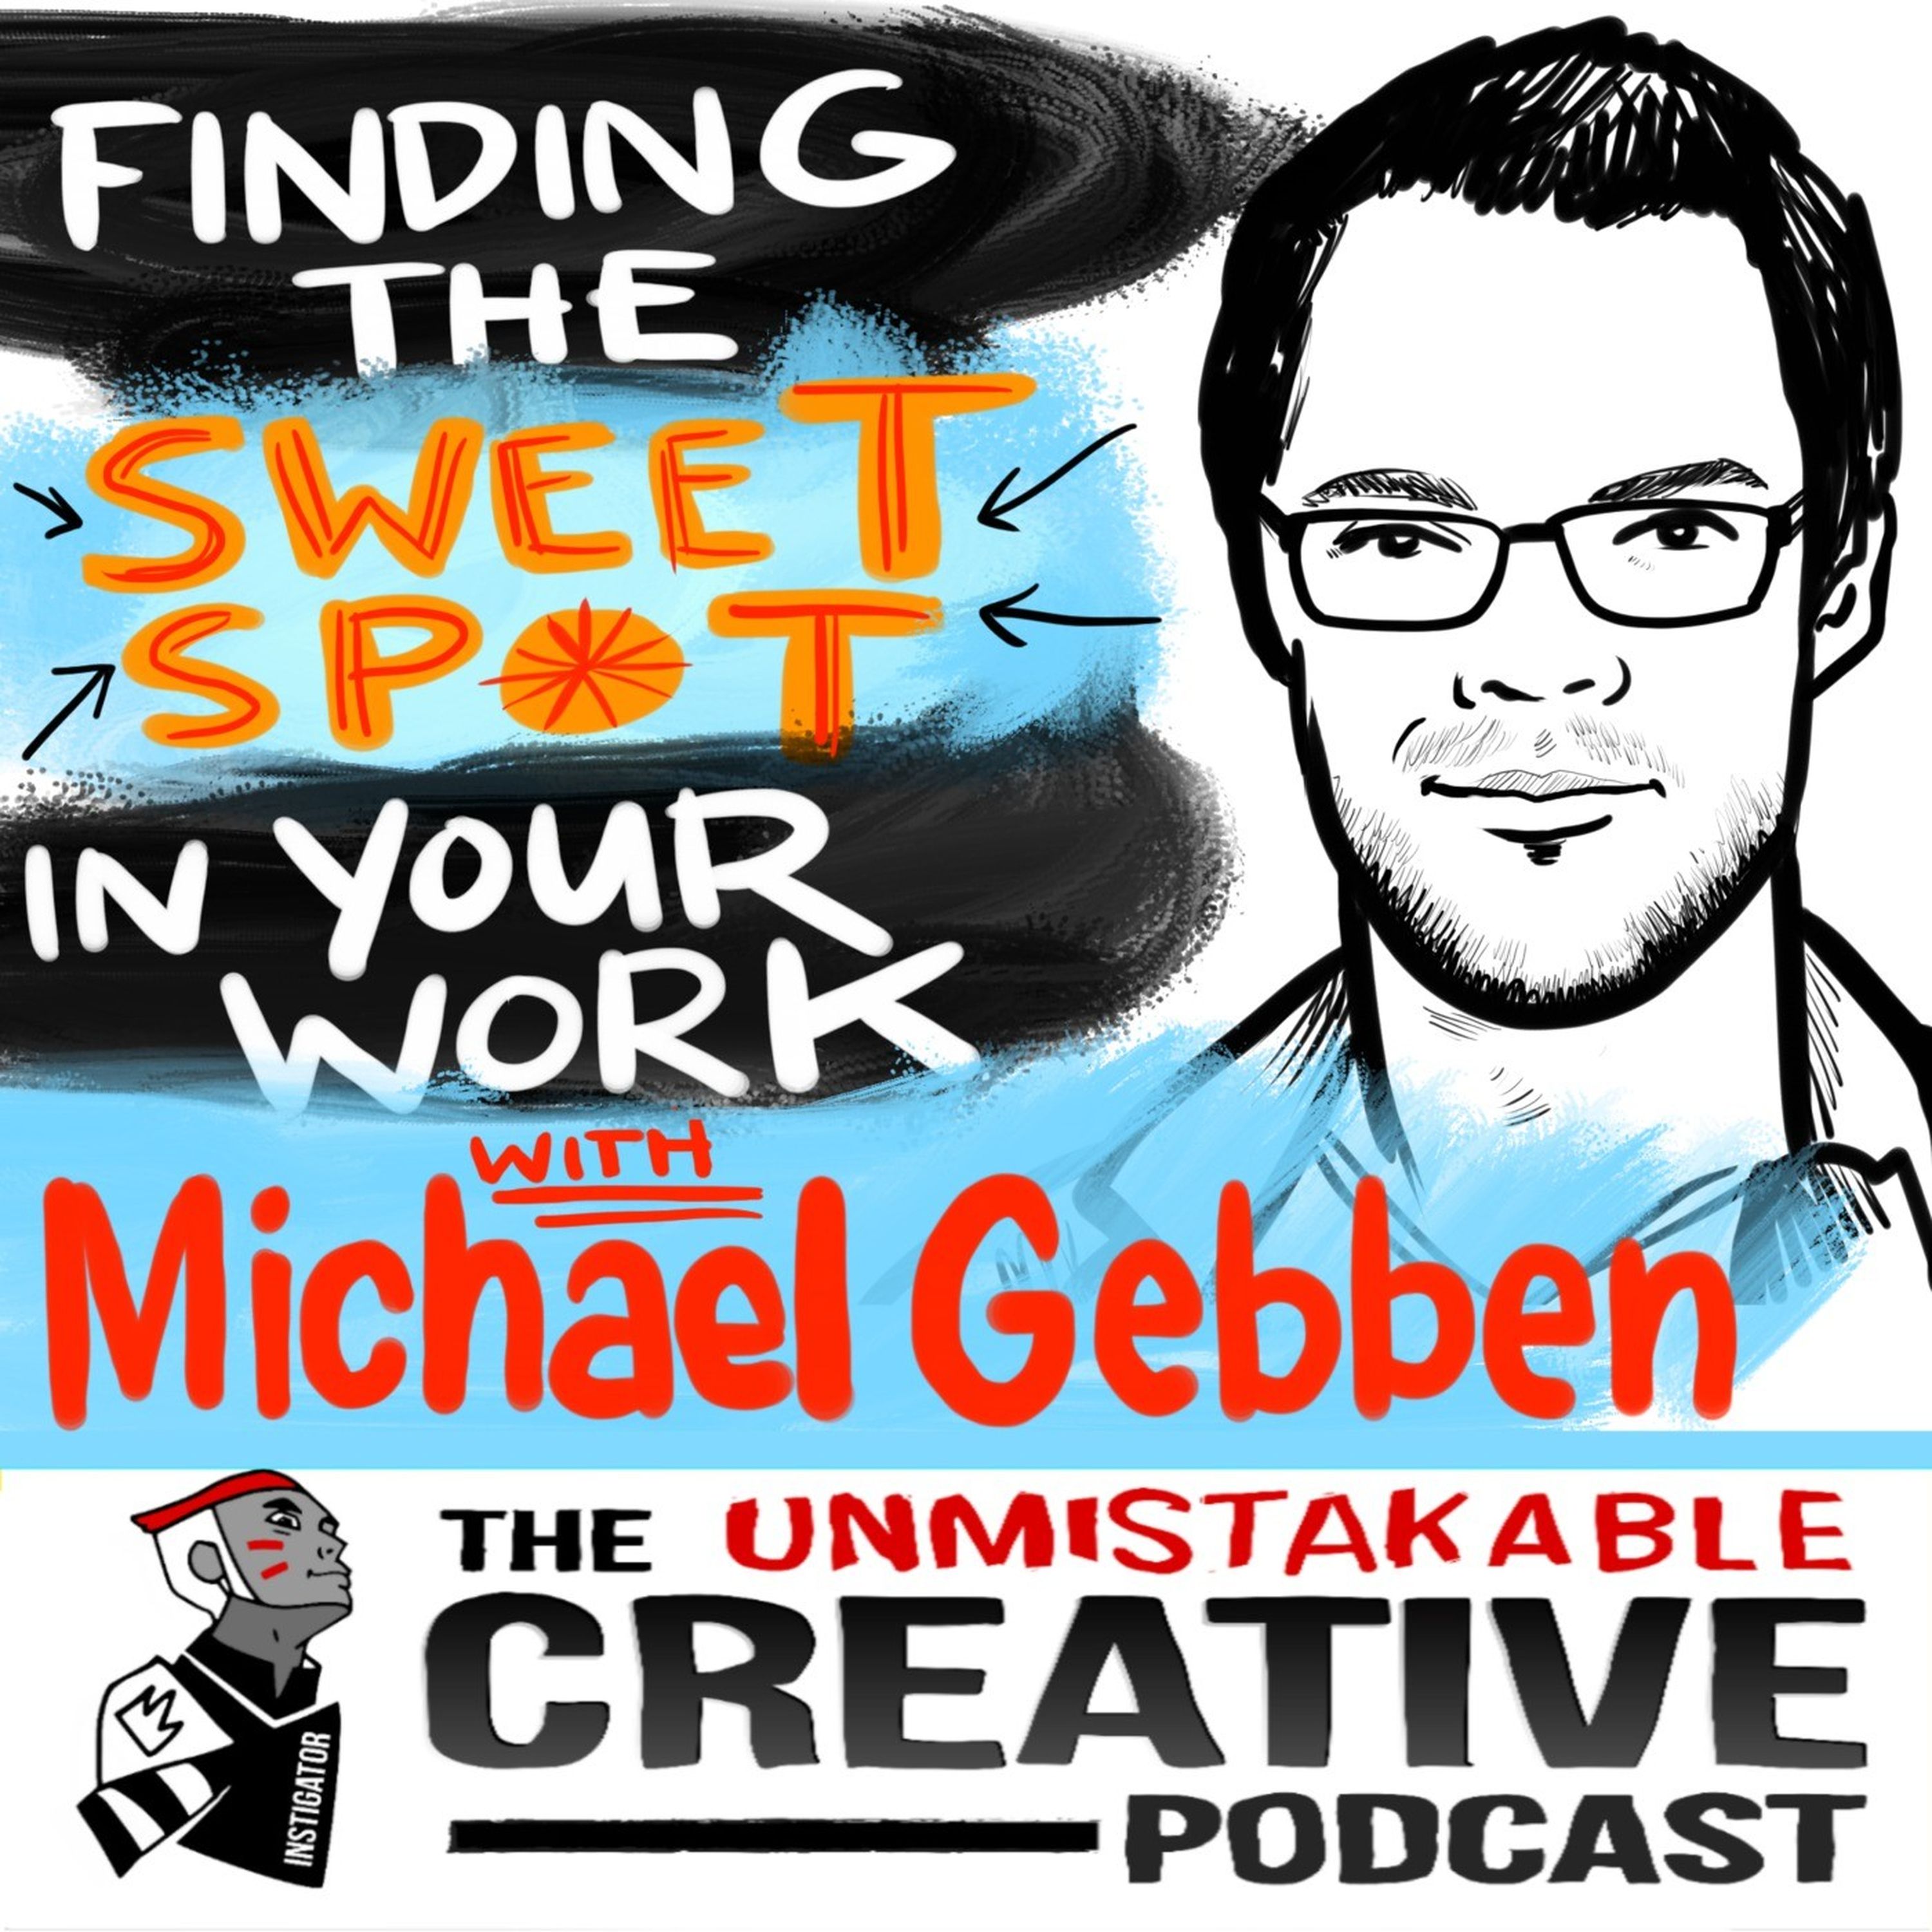 Finding The Sweet Spot in Your Work with Michael Gebben